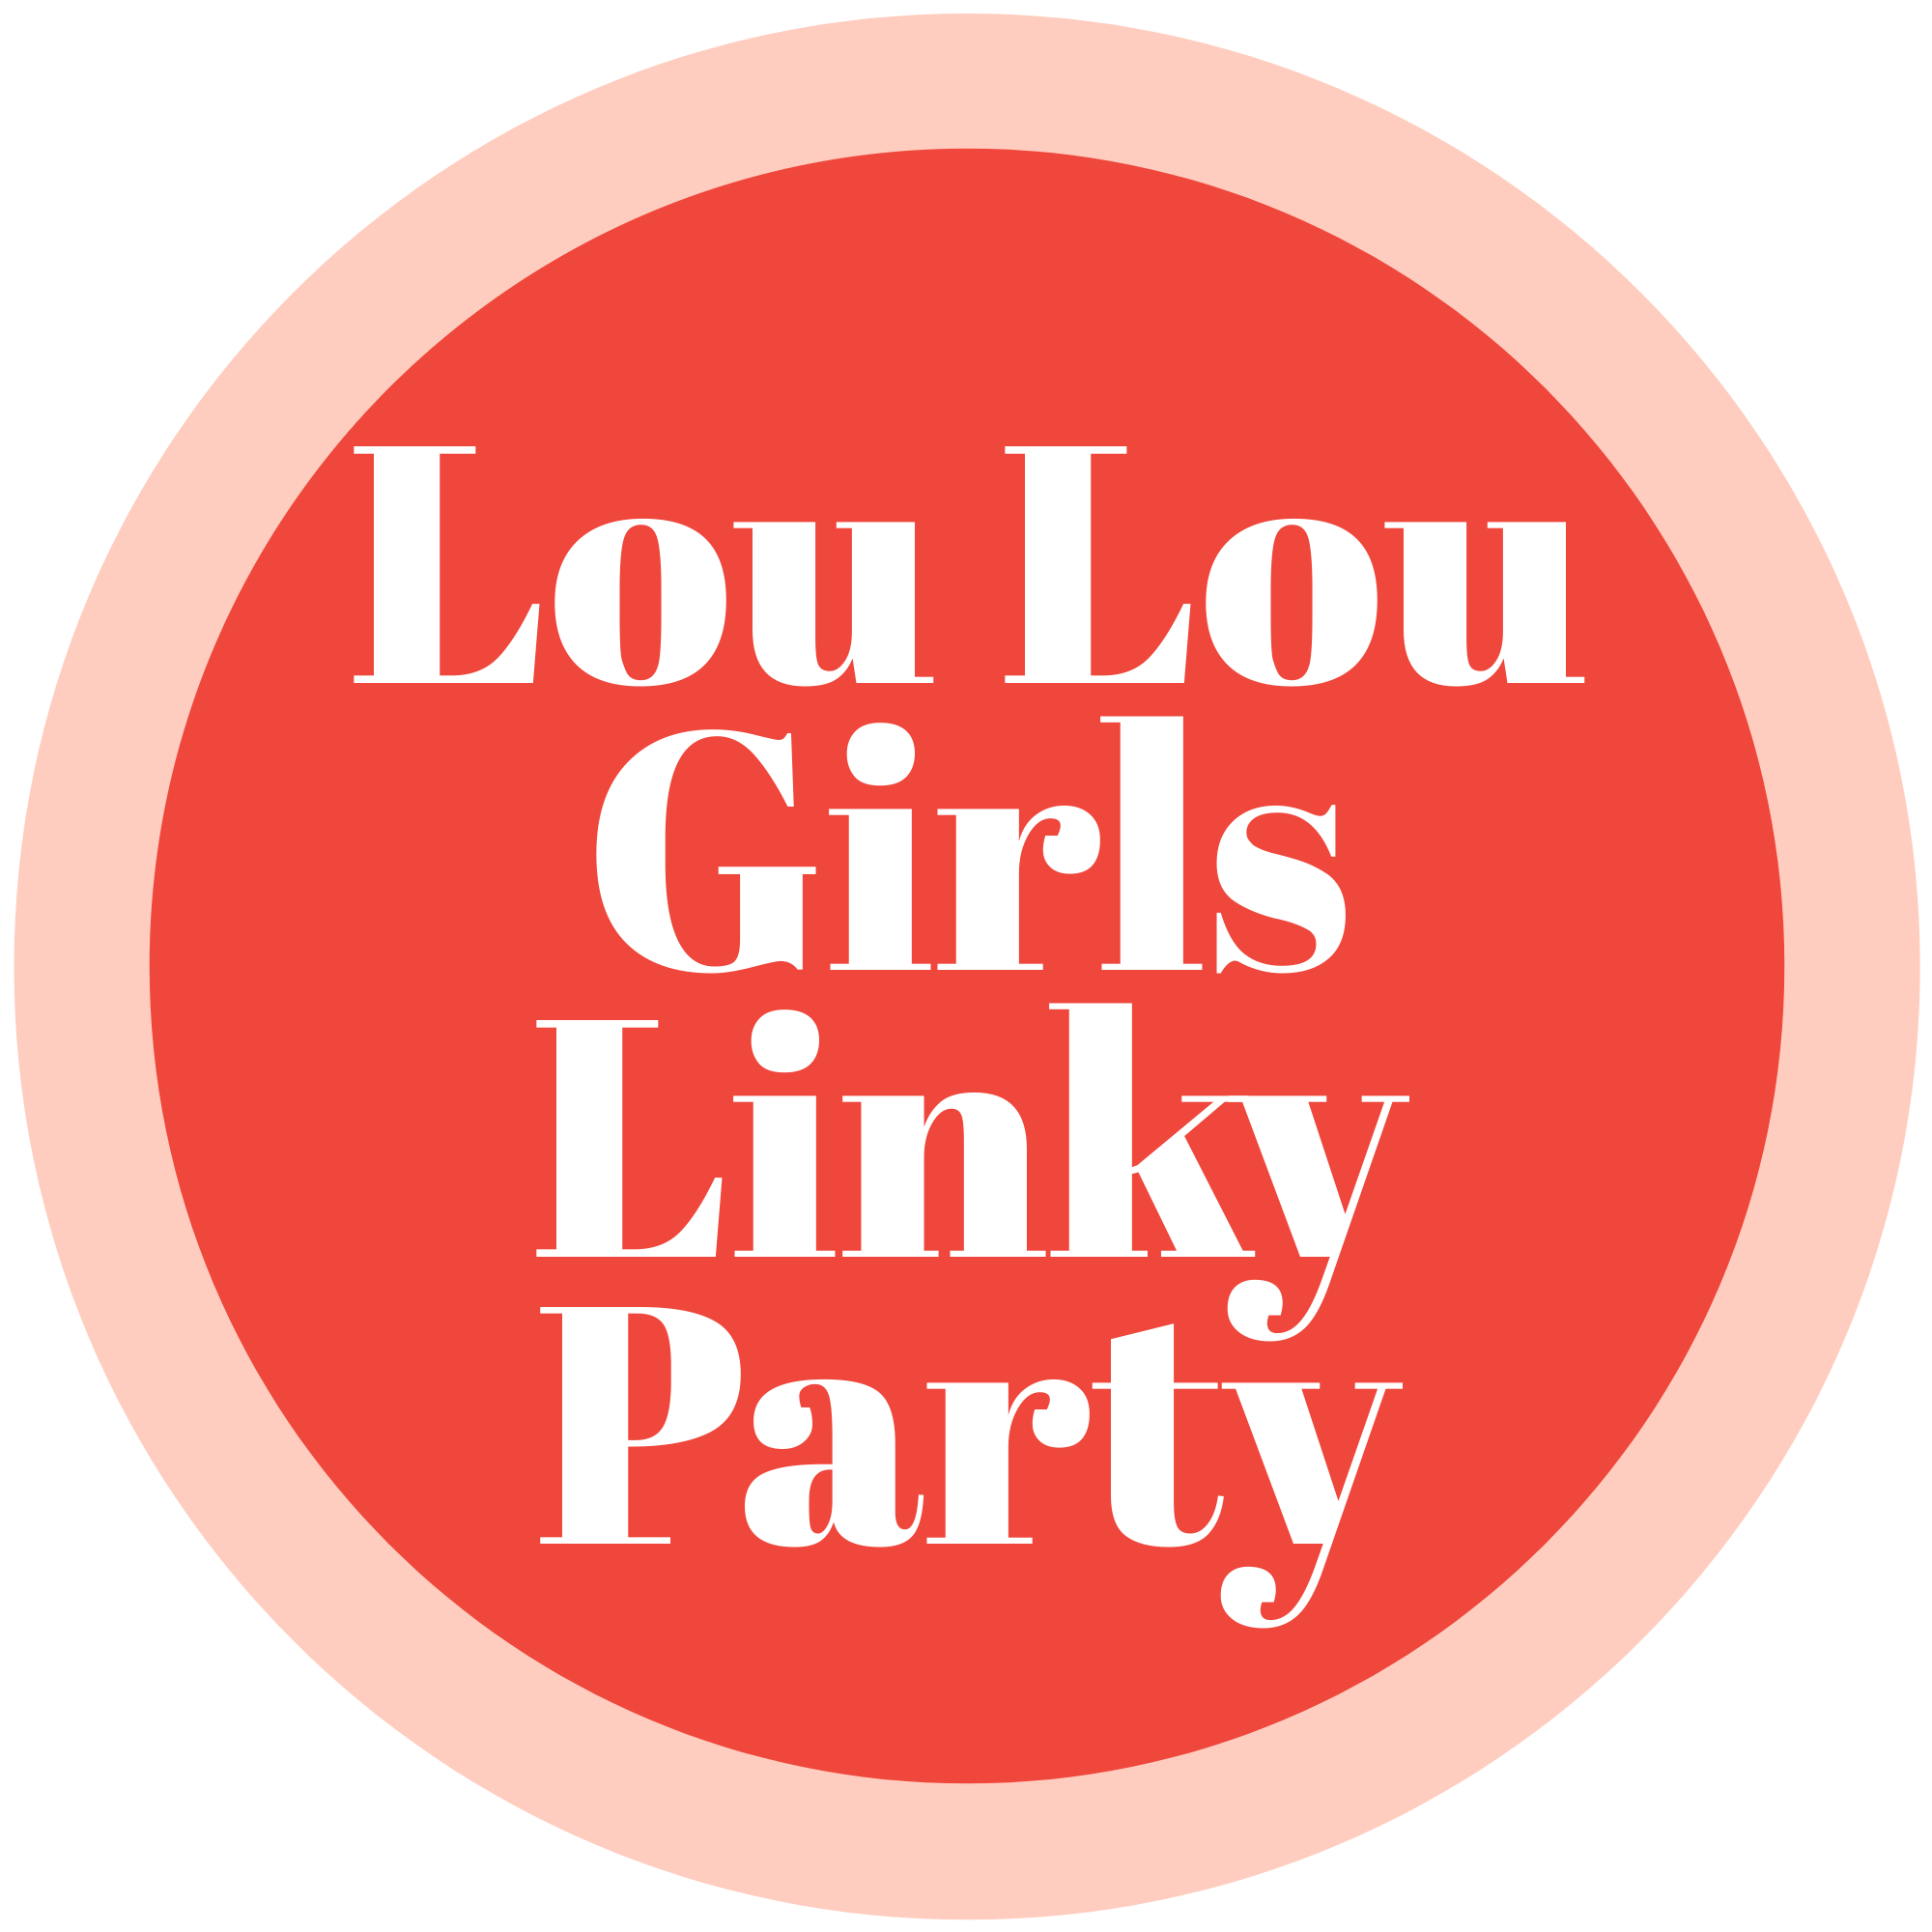 Lou Lou Girls Fabulous Party 499 #linkyparty #bloghop #linkyparties